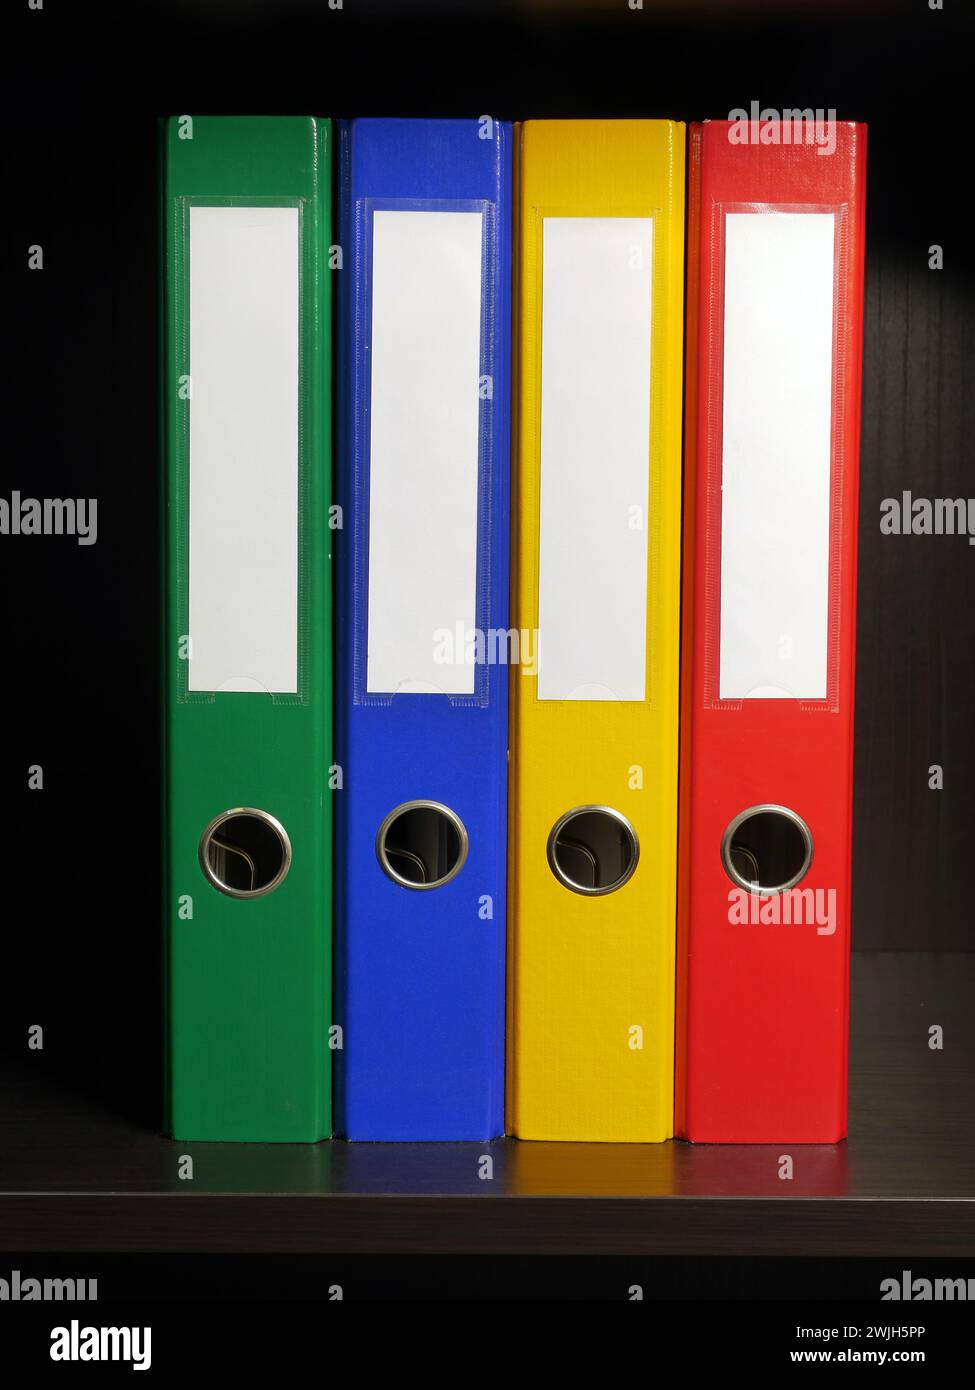 Four empty binders in green, blue, yellow and red colors arranged inside black cabinet Stock Photo